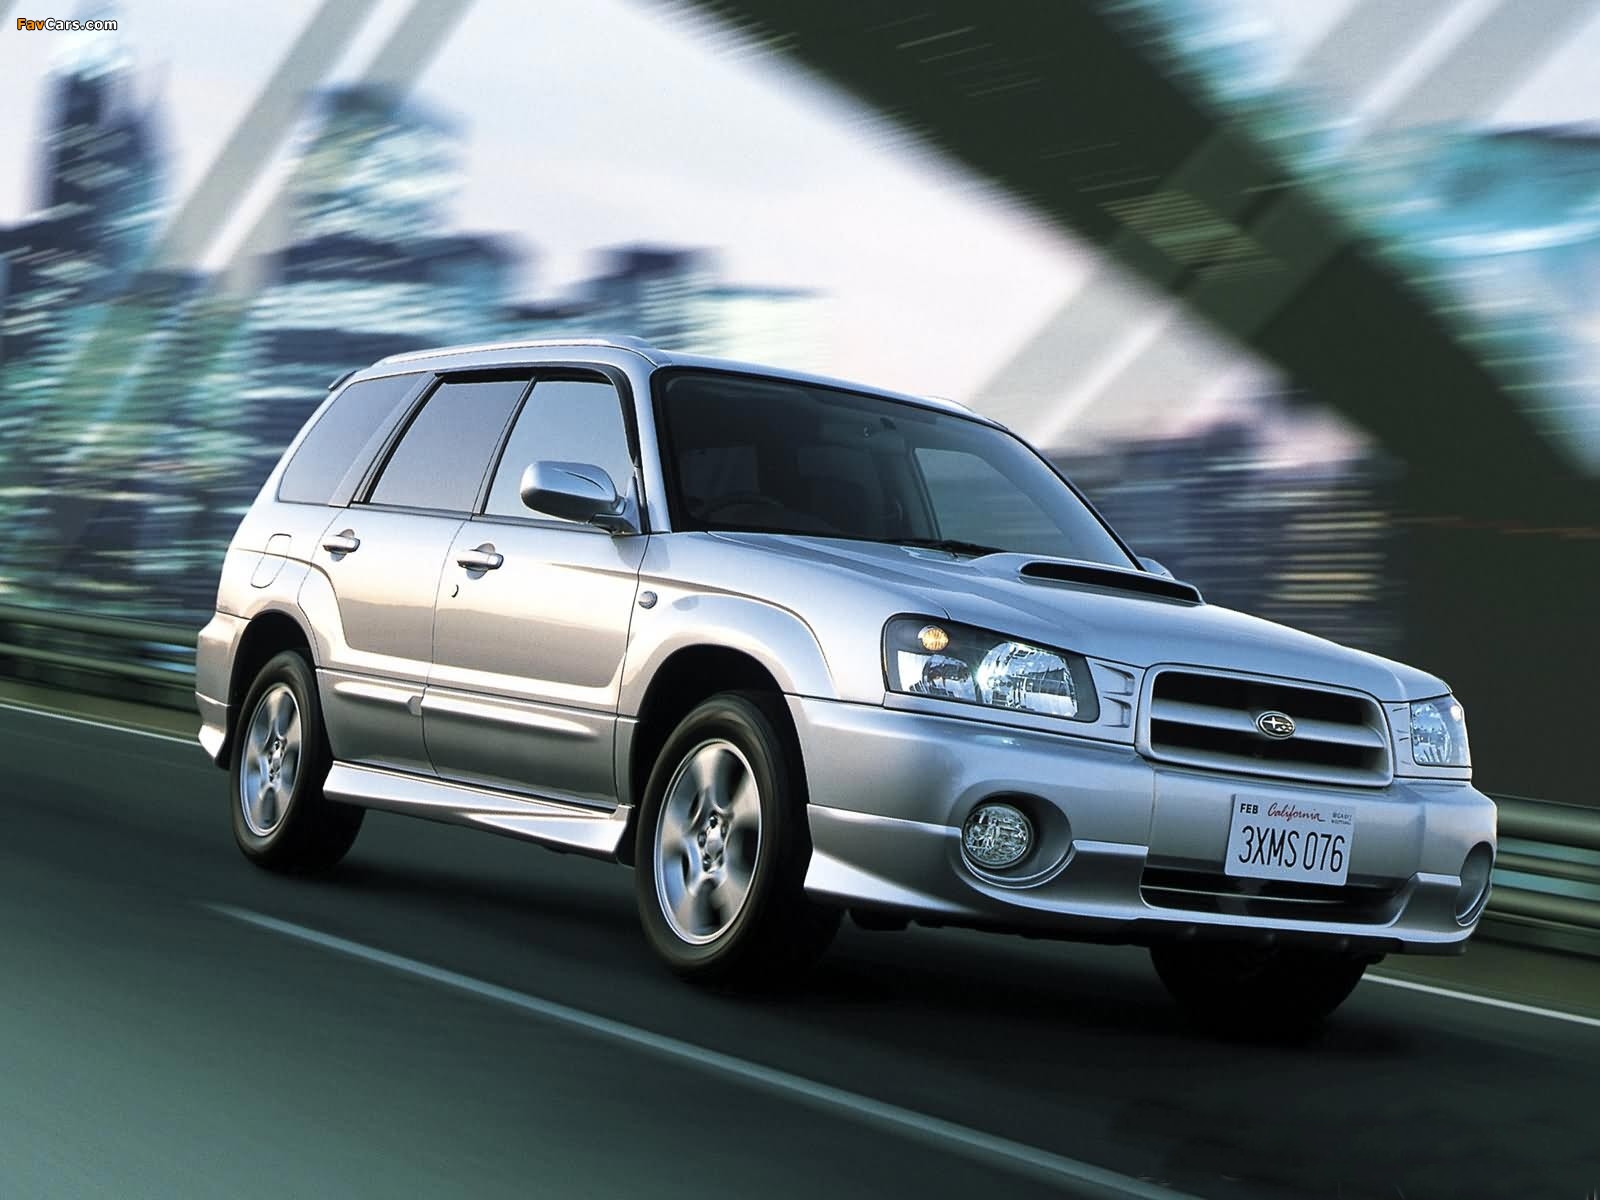 Images of Subaru Forester (1600 x 1200)